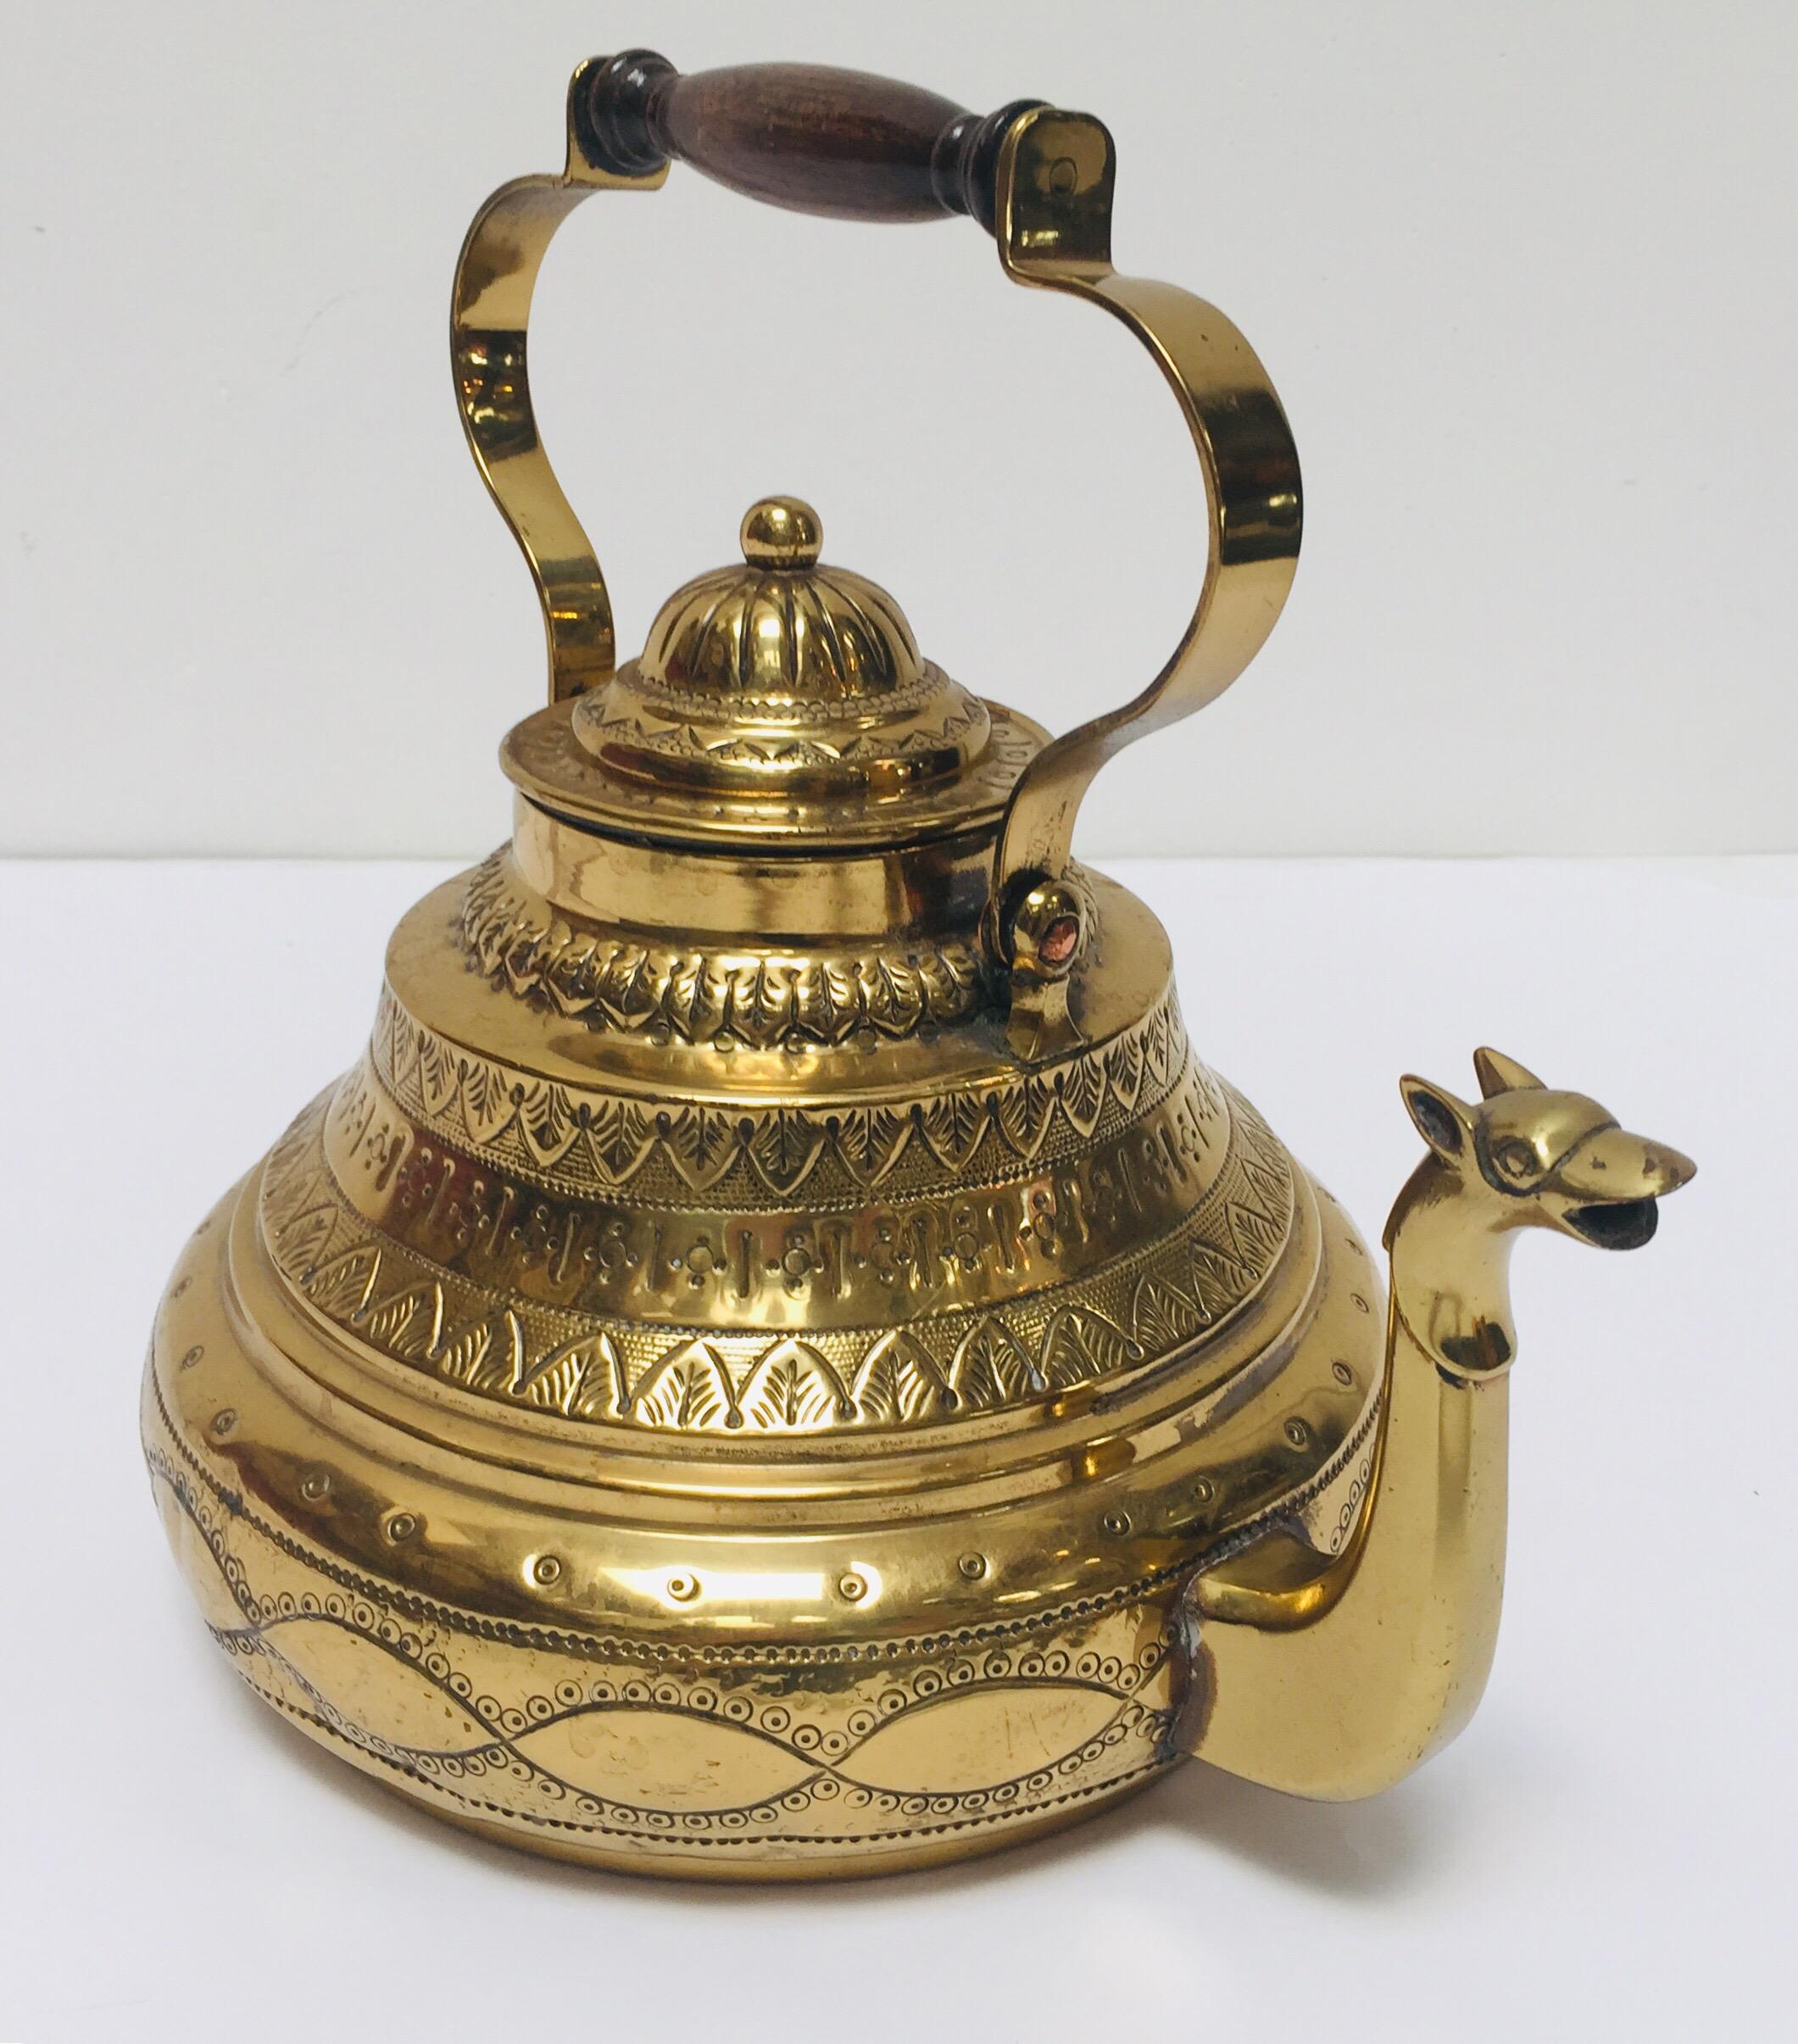 Hammered Moroccan Antique Brass Tea Kettle Pot with Camel Spout